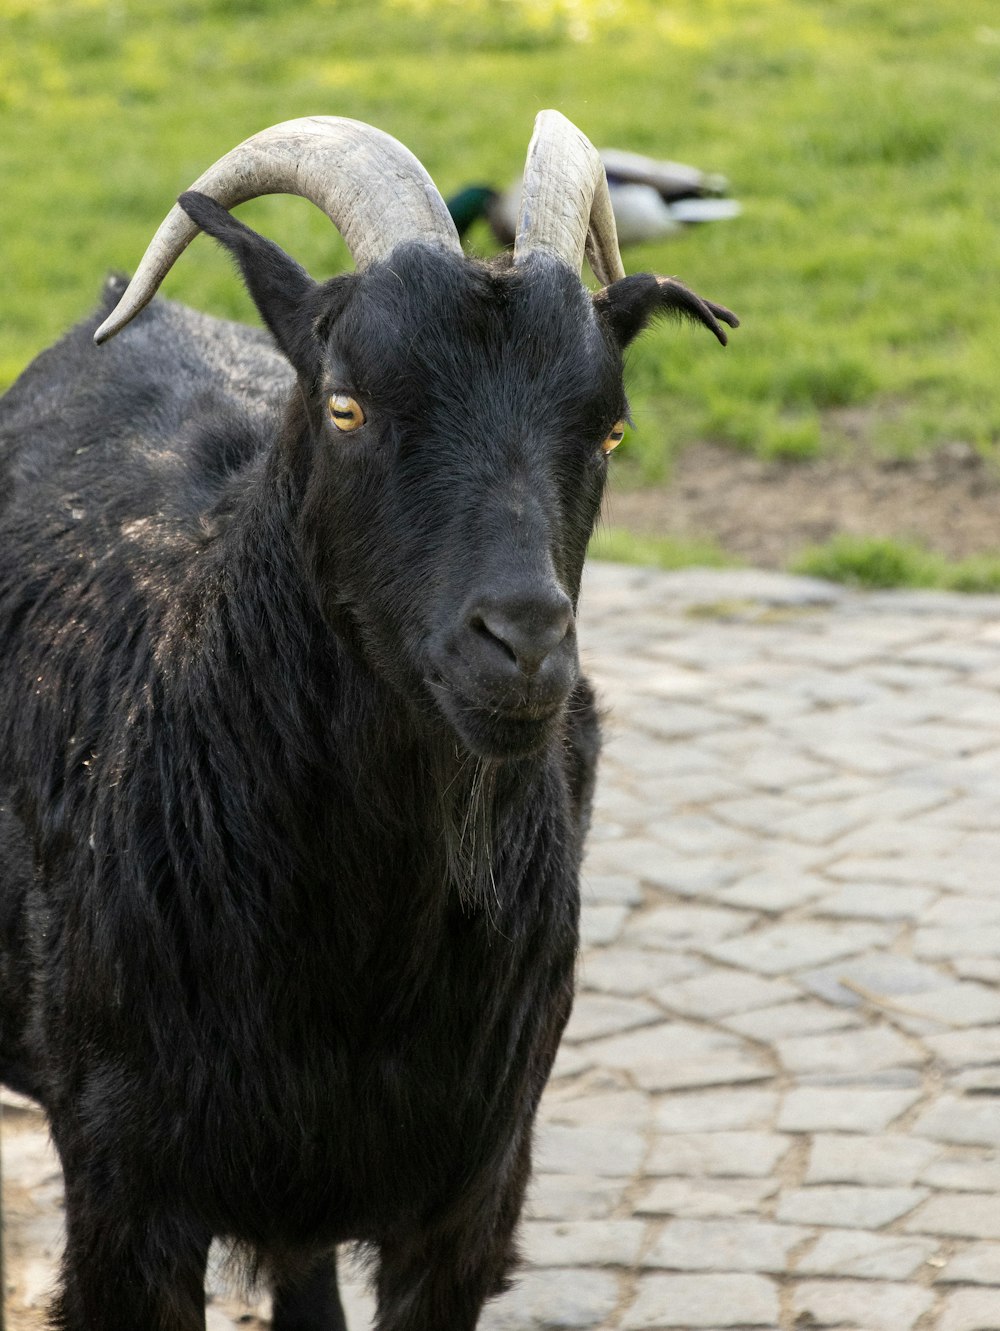 a black goat with long horns standing on a brick walkway